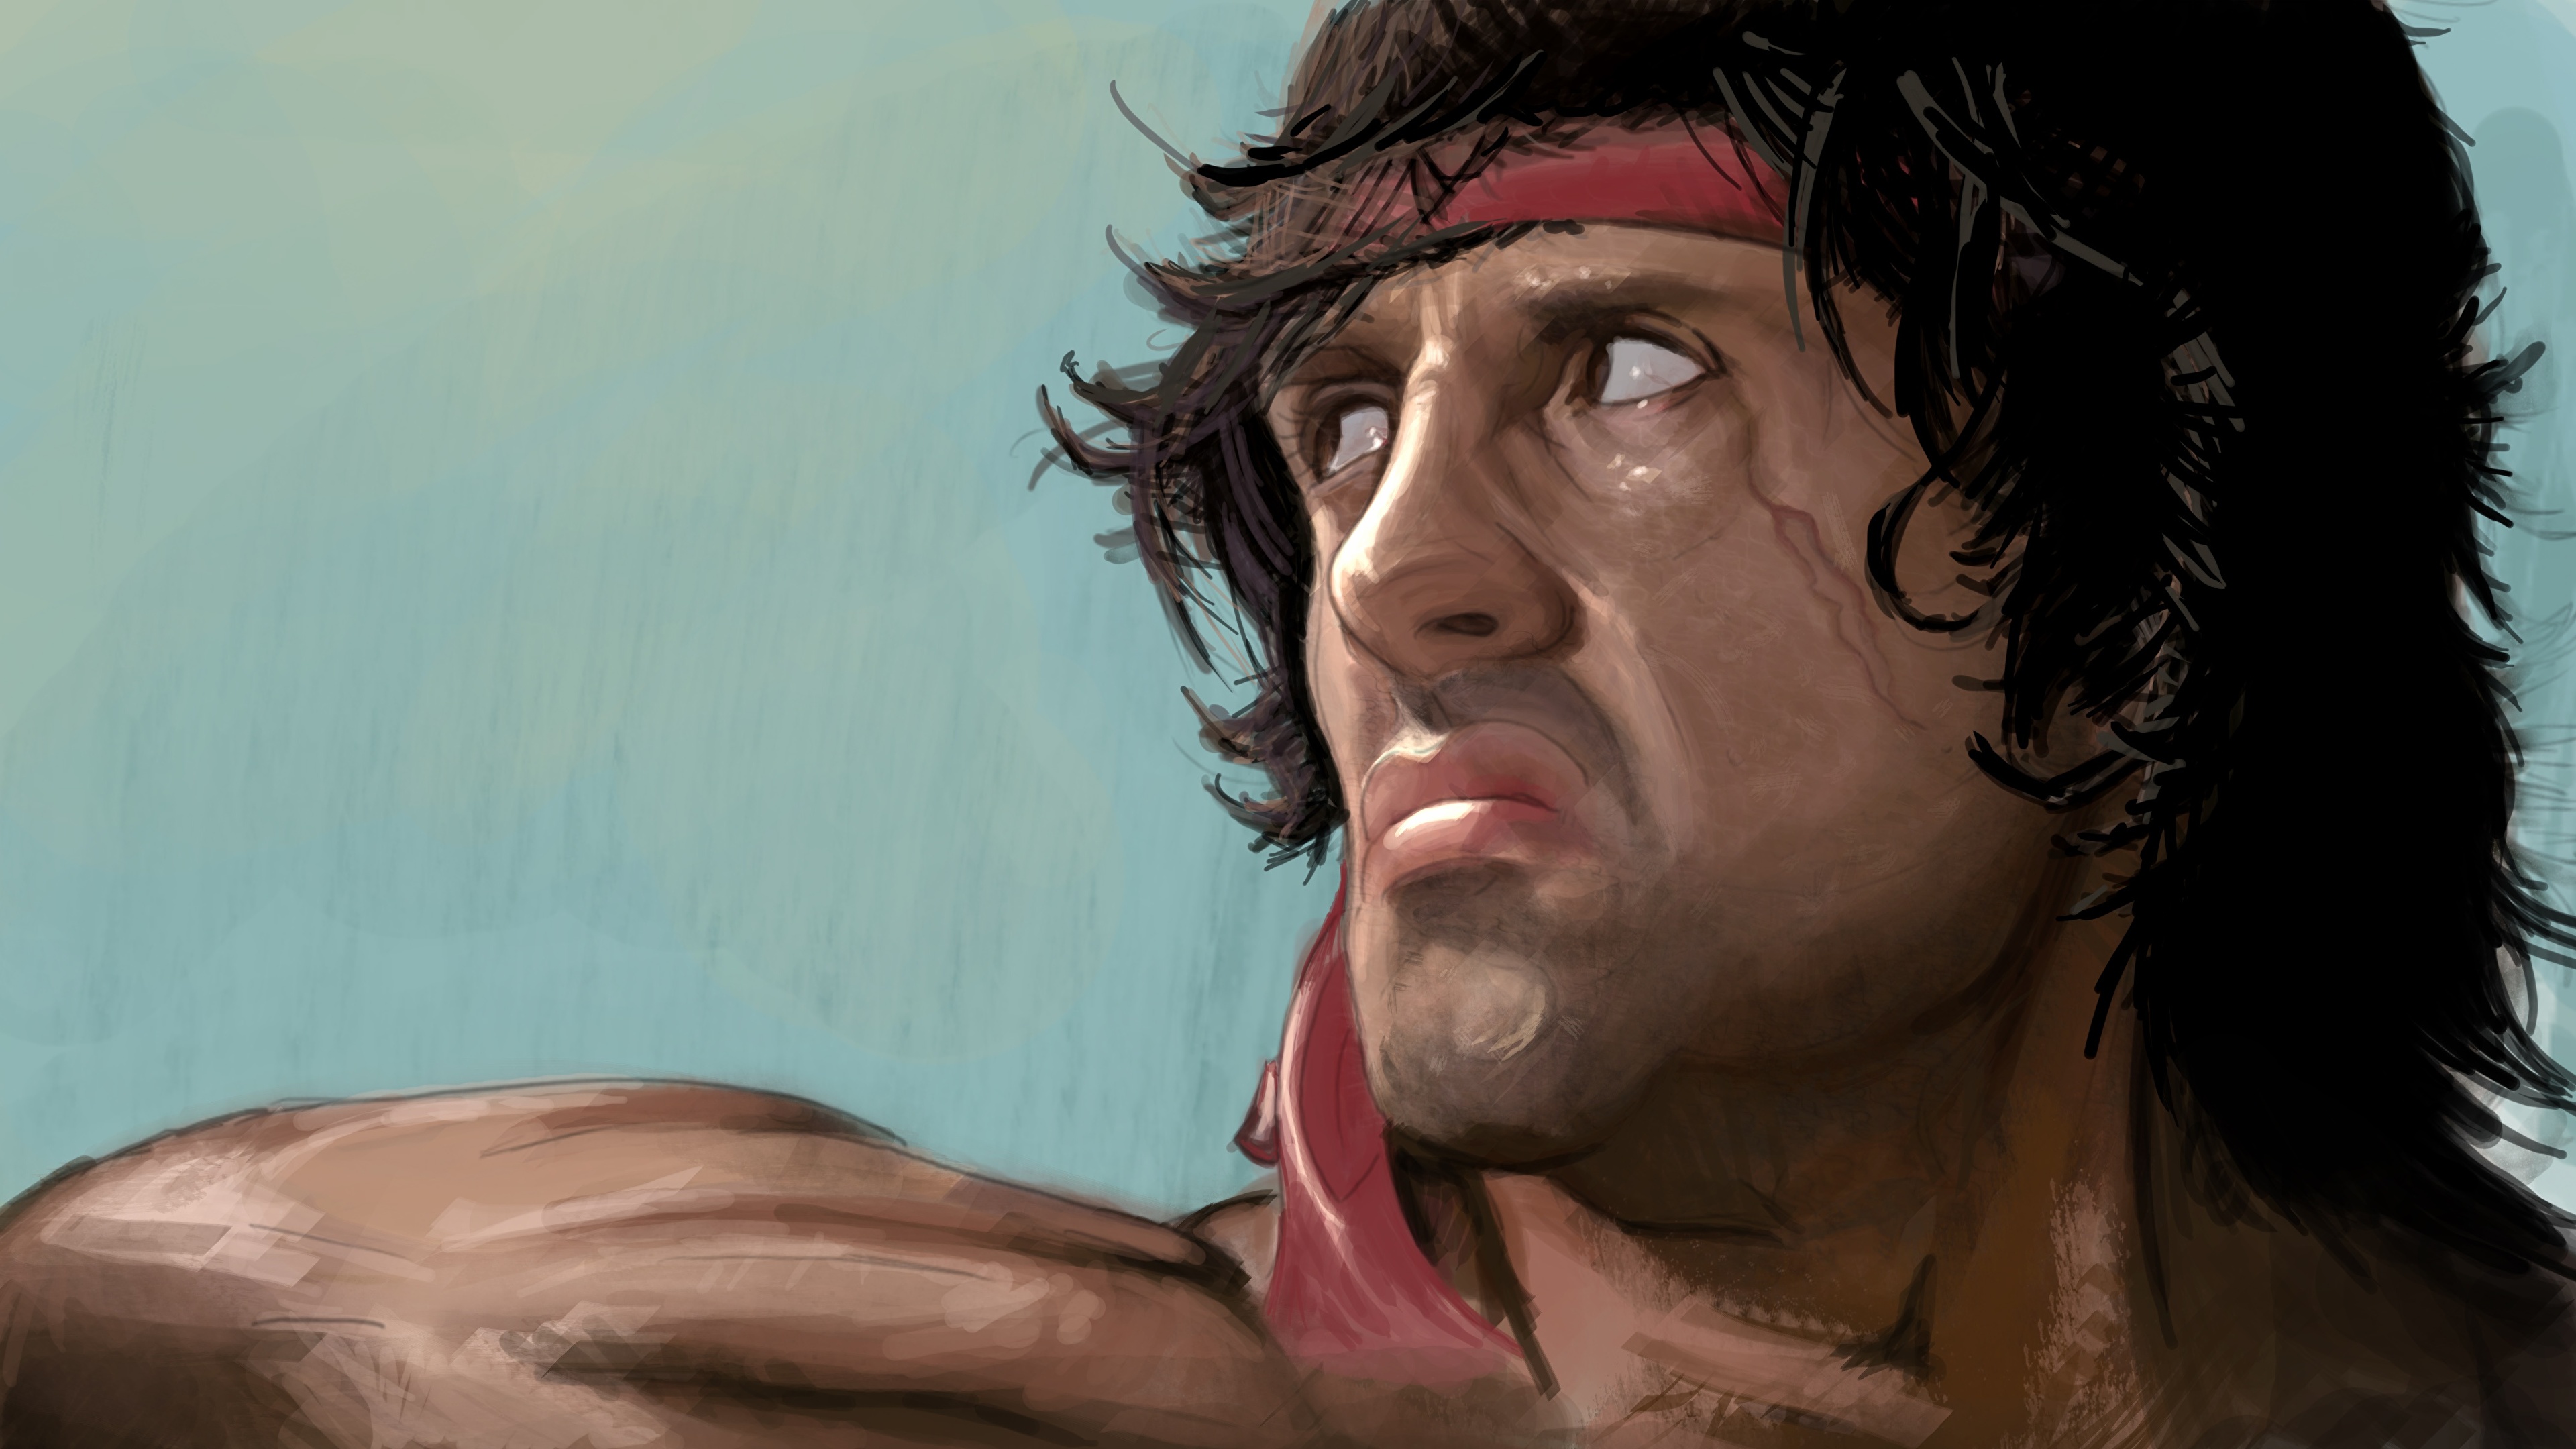 Images Sylvester Stallone dissatisfied Rambo Face Movies 3840x2160